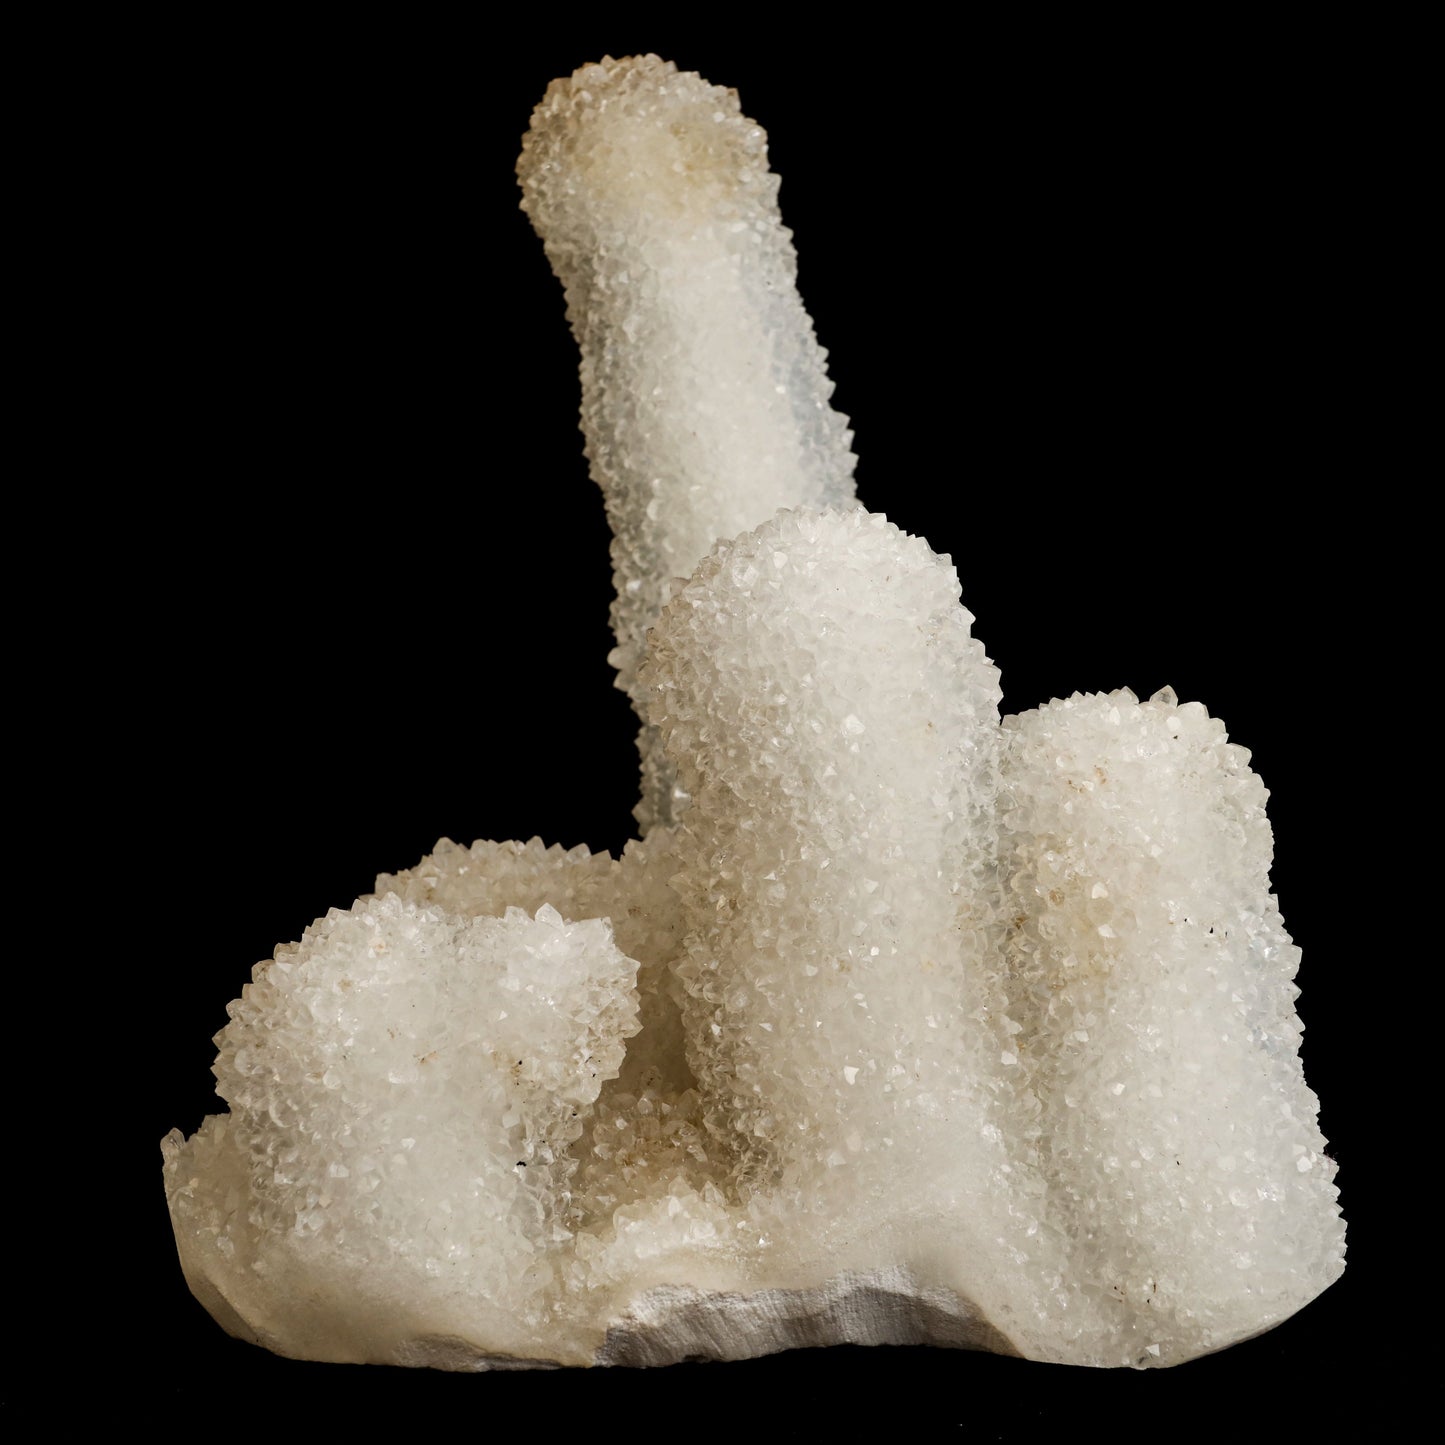 Sparkling MM Quartz Coral Formation Natural Mineral Specimen # B 5006  https://www.superbminerals.us/products/sparkling-mm-quartz-coral-formation-natural-mineral-specimen-b-5006  Features:&nbsp;The specimen is filled with drusy milky Quartz which has created pseudomorphs after scalenohedral Calcite crystals.The item is crystallised nearly all the way around with no matrix, and only a few small places of connection, thus it's close to becoming a complete "floater".Specimens from this area